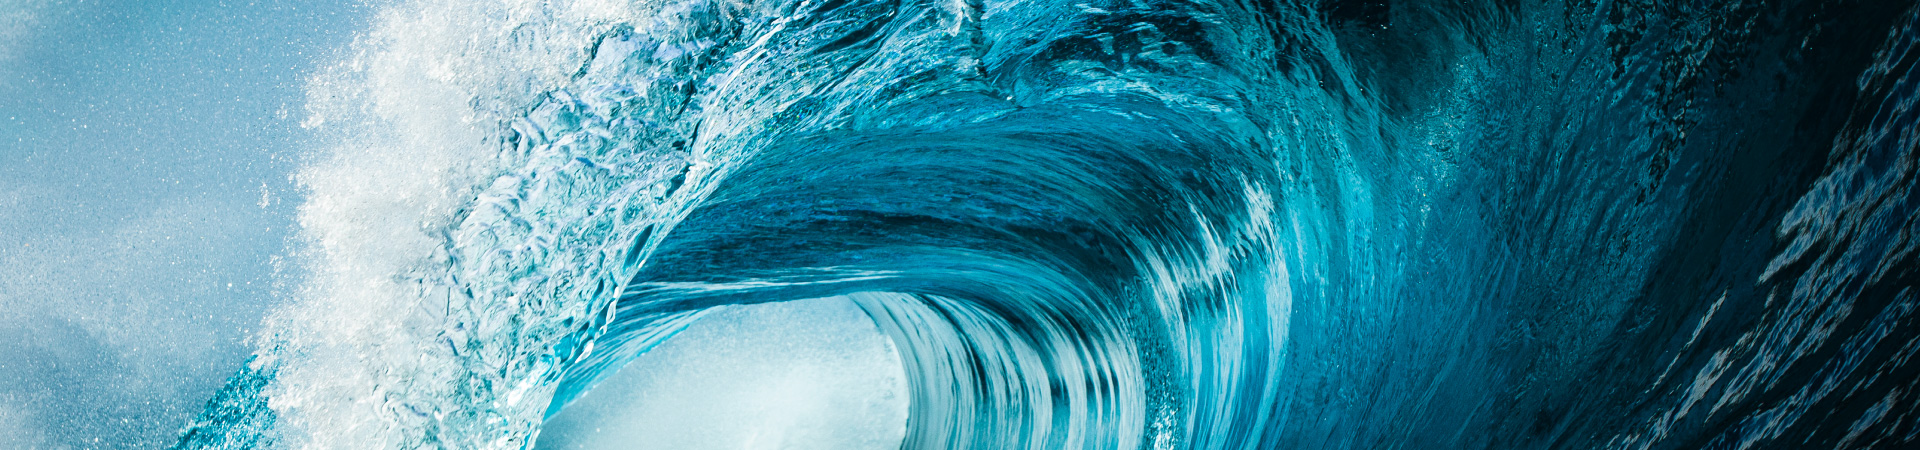 Oceanic force captured in a breaking wave